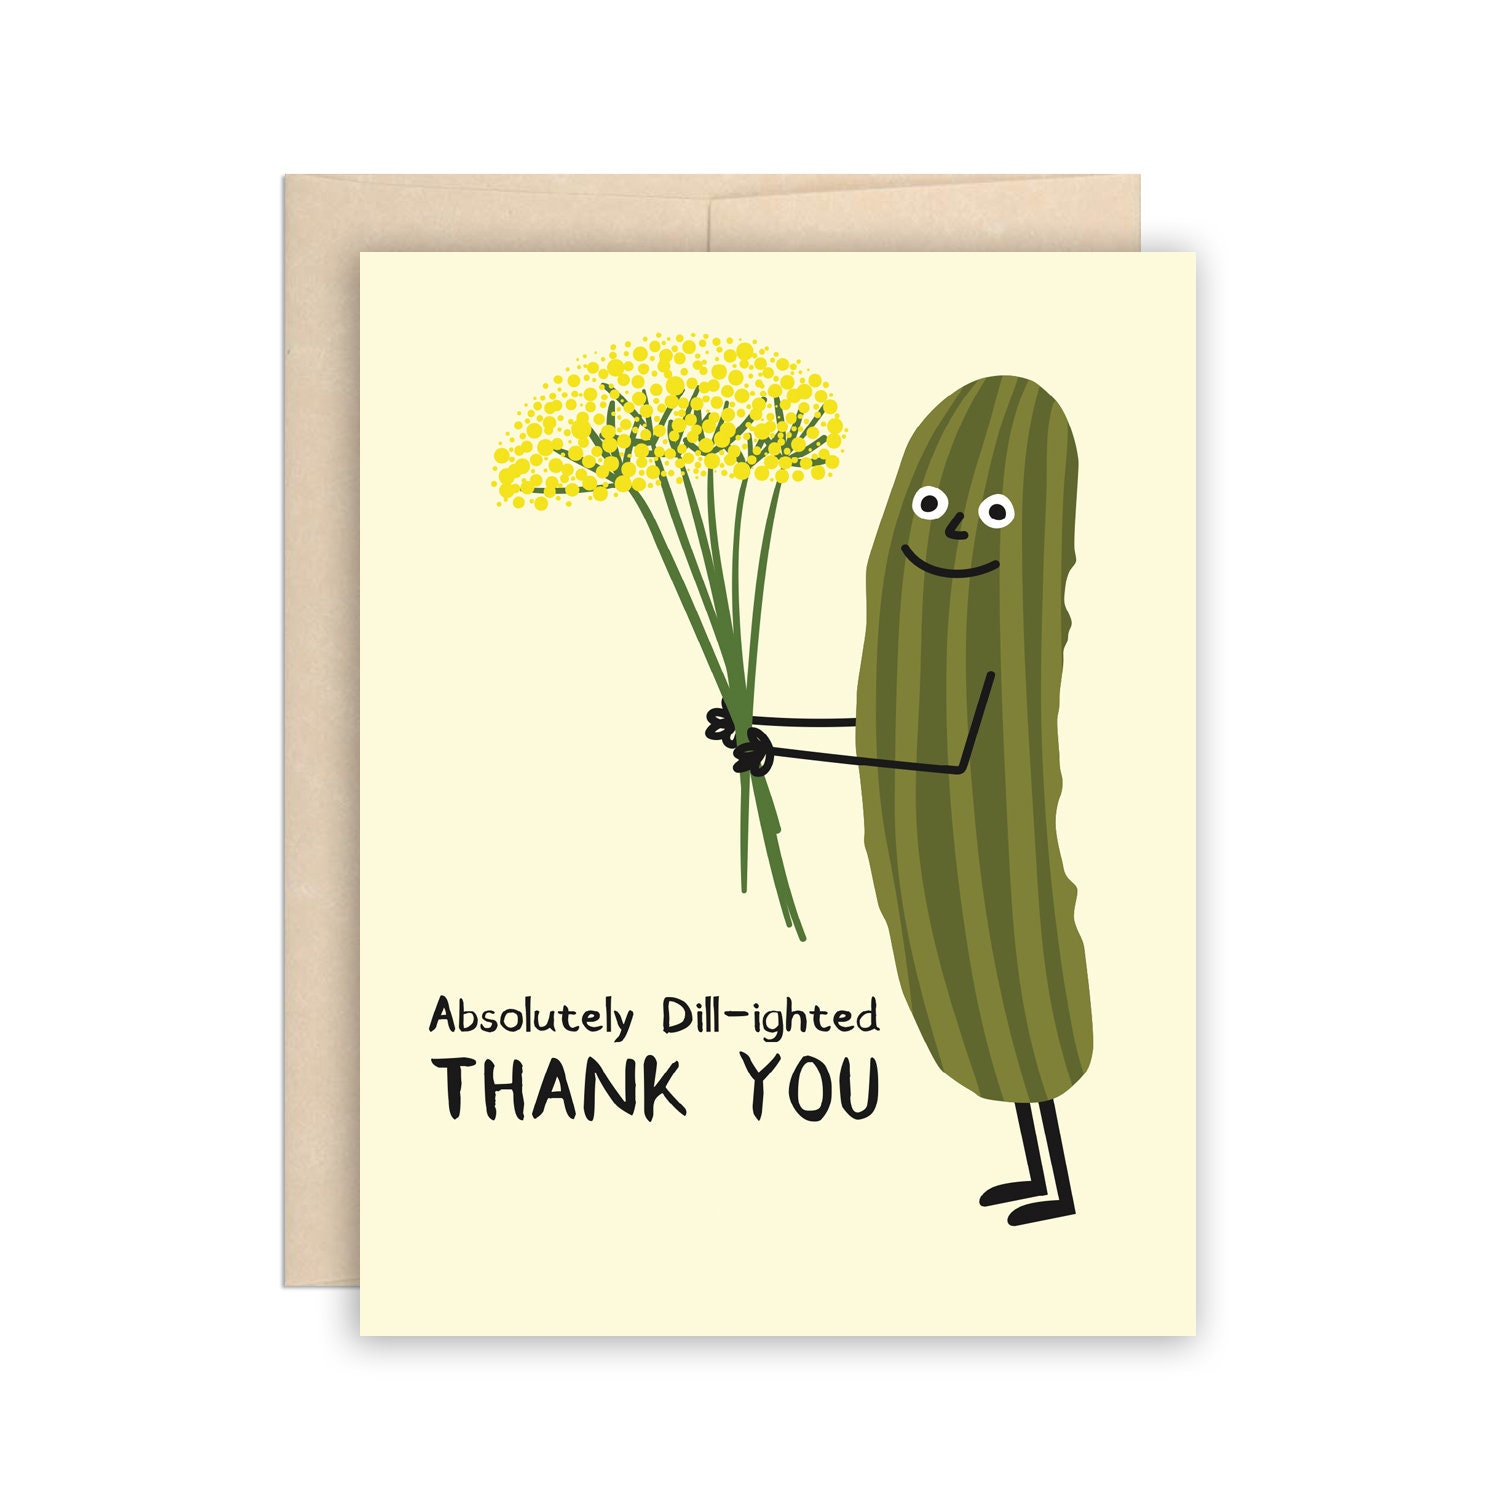 Emotional Support Pickle 4-Up 5.5x4.25 Printable Note Cards